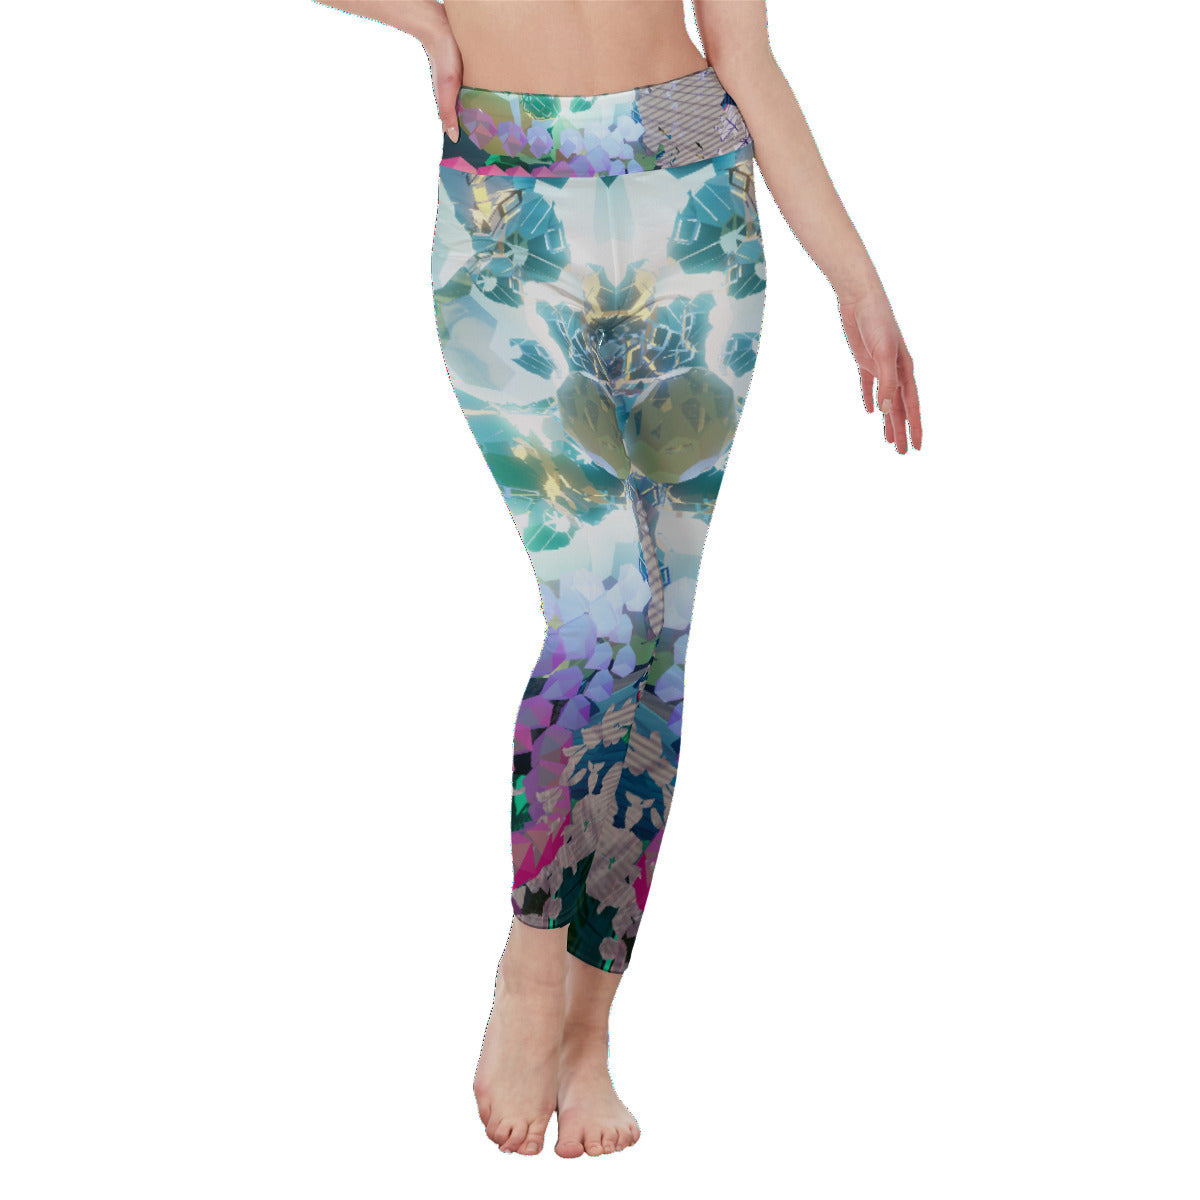 3D Psychedelic Floral Print Women's High Waist Leggings | Side Stitch Closure